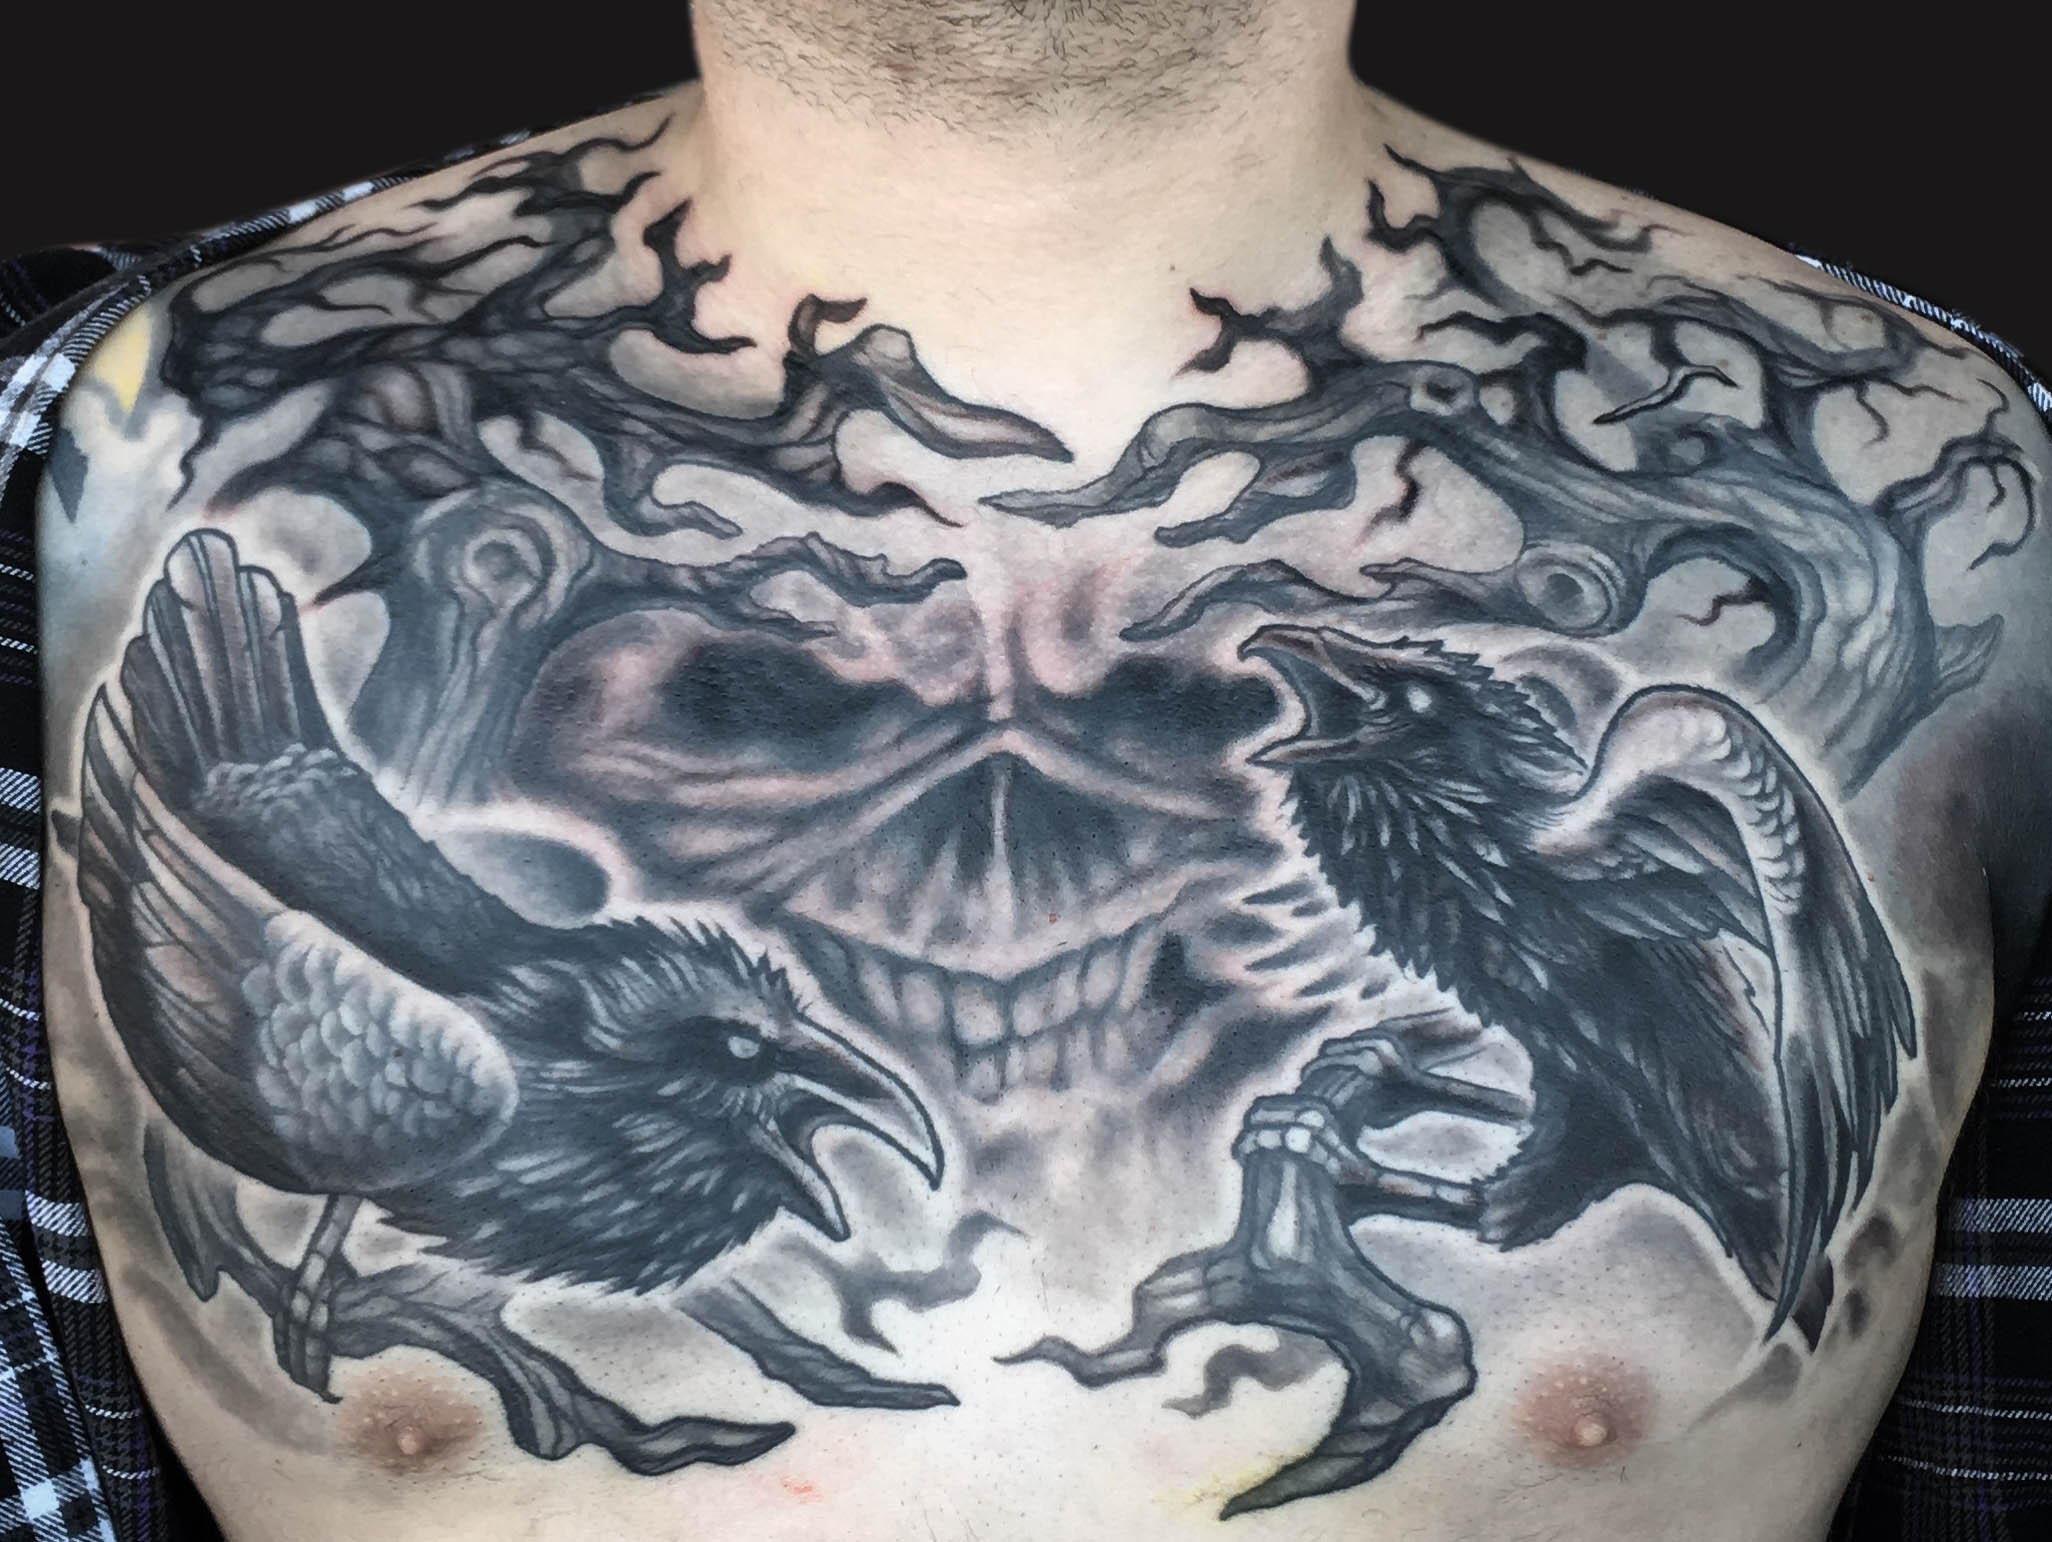 Black Ink Two Ravens With Skull Tattoo On Man Chest By Spencer Caligiuri